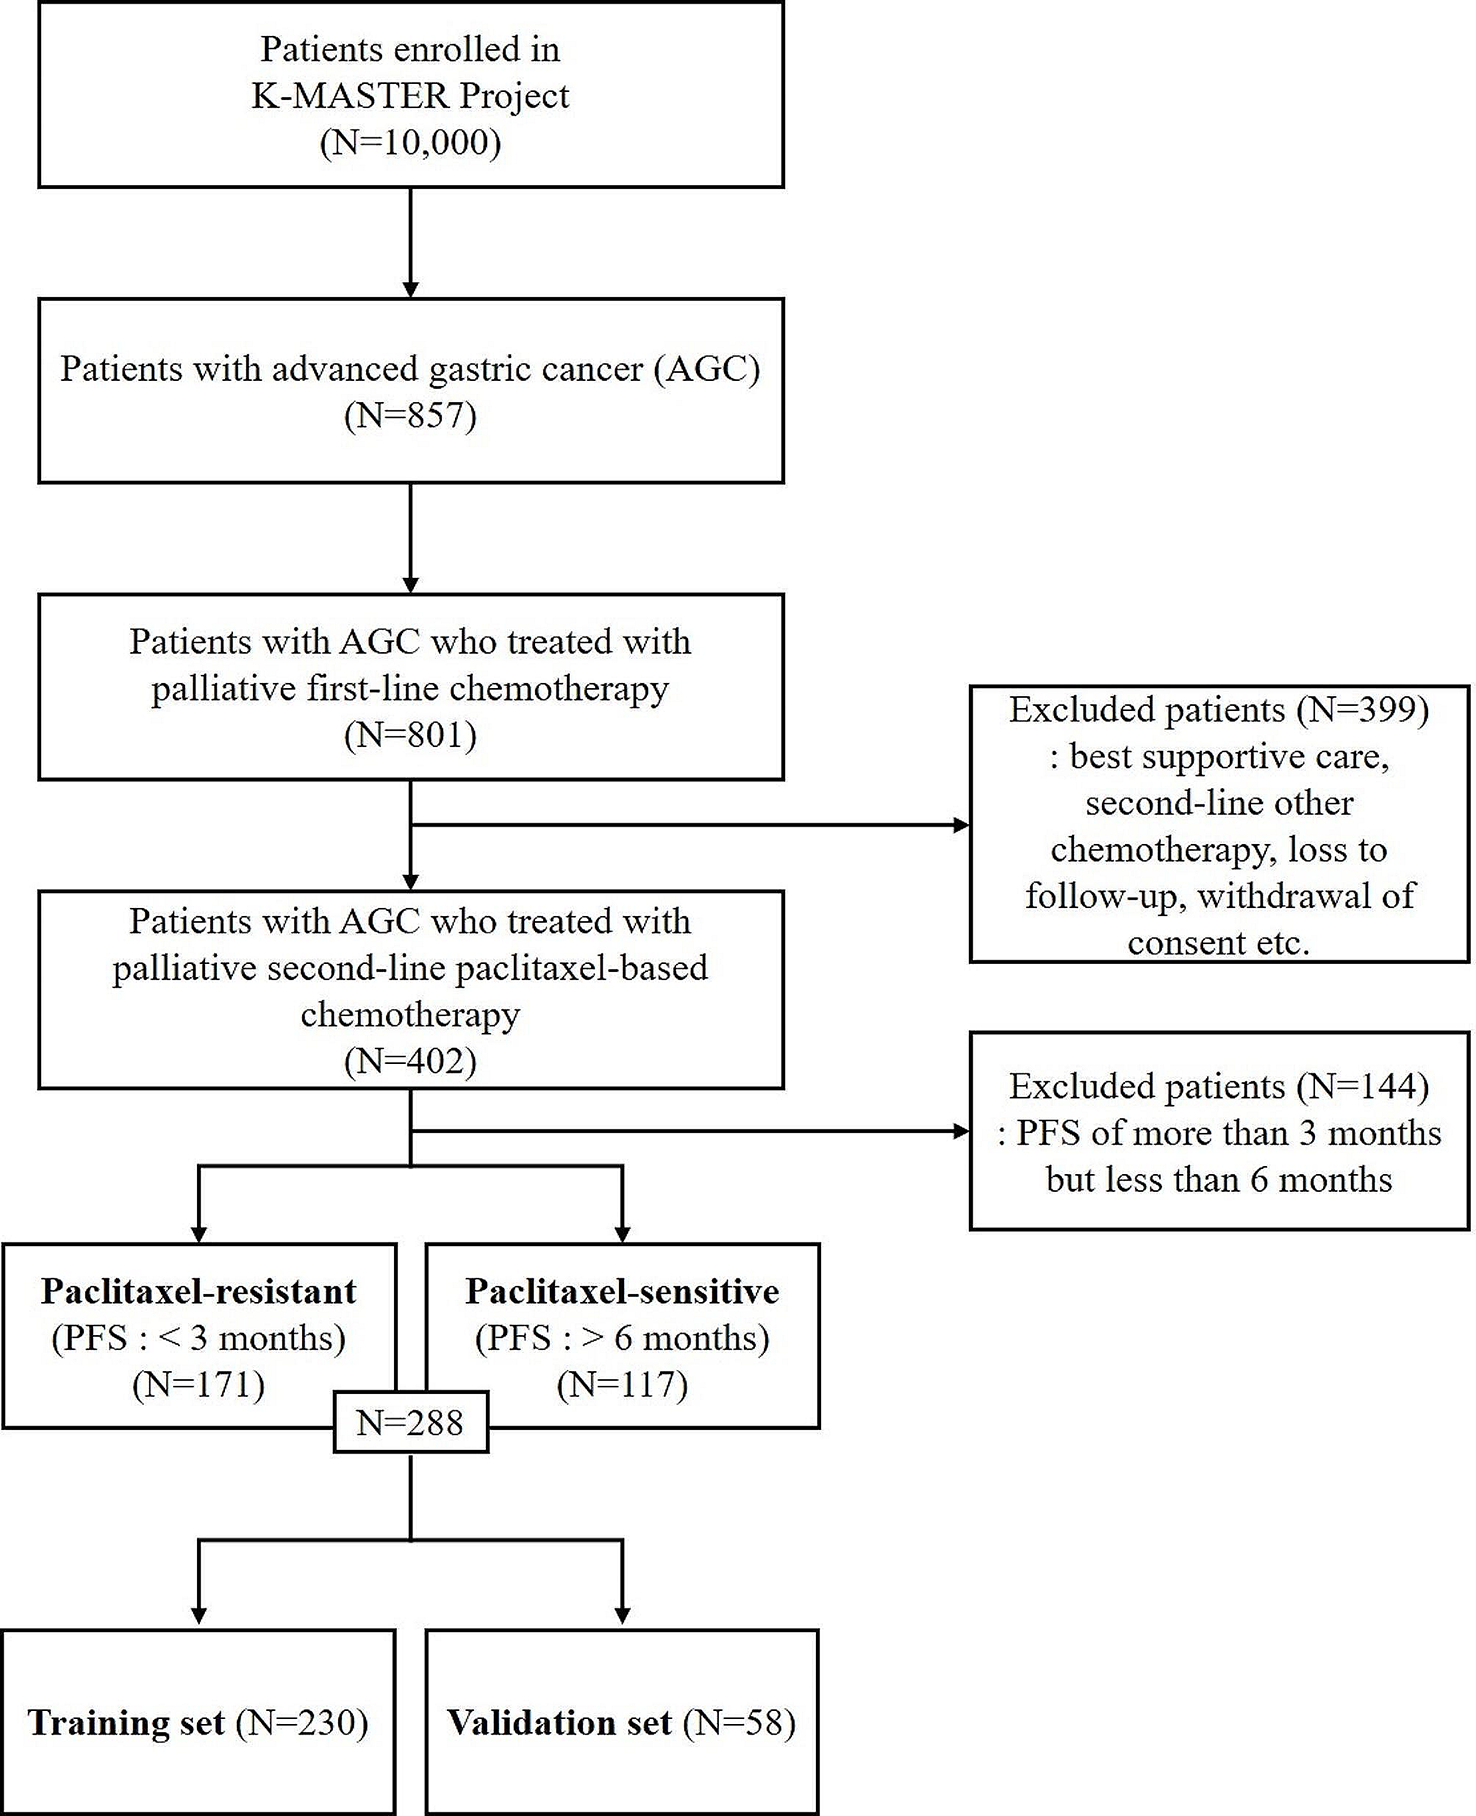 Integrated clinical and genomic models using machine-learning methods to predict the efficacy of paclitaxel-based chemotherapy in patients with advanced gastric cancer